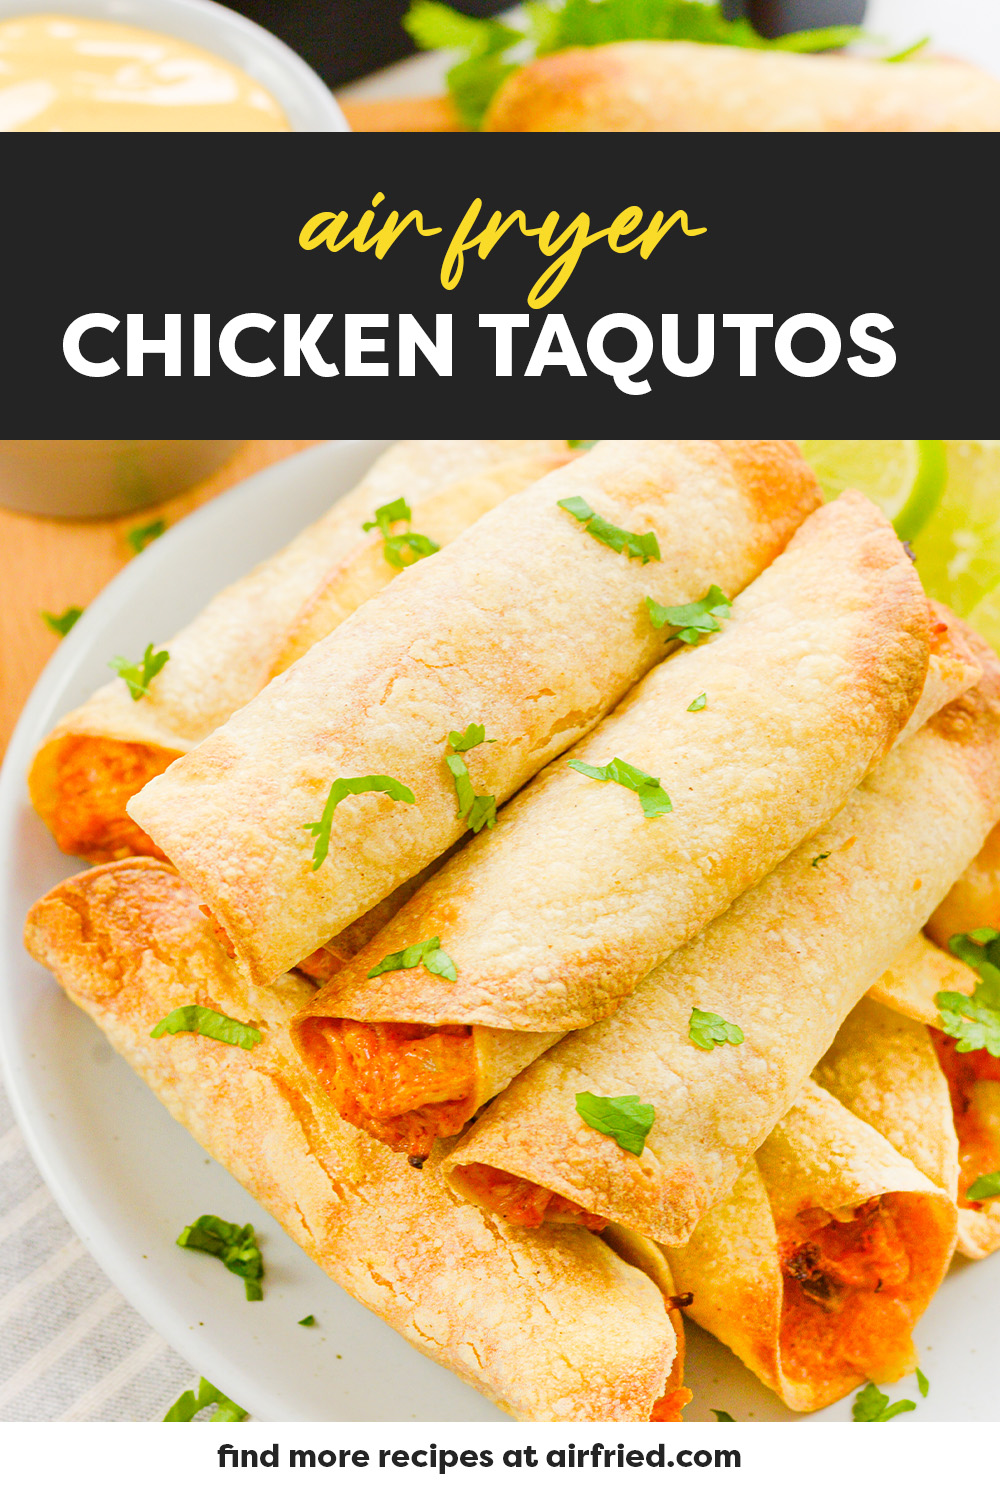 These crispy chicken taquitos are simple to make in the air fryer from scratch!  Dip them in your favorite sauce and go to town on them!